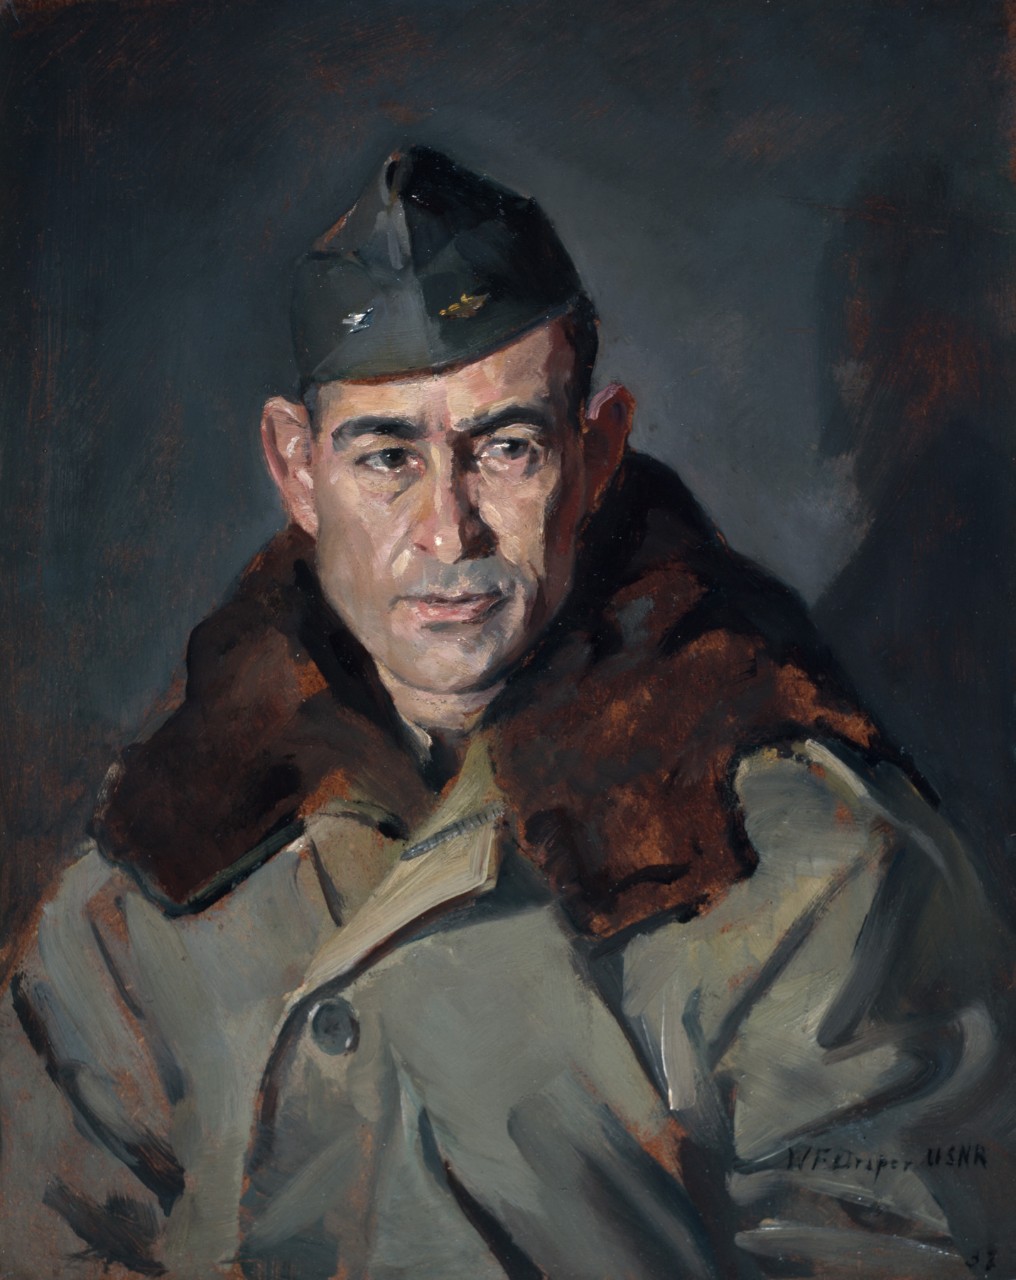 Portrait of a navy officer in a cold weather outerwear